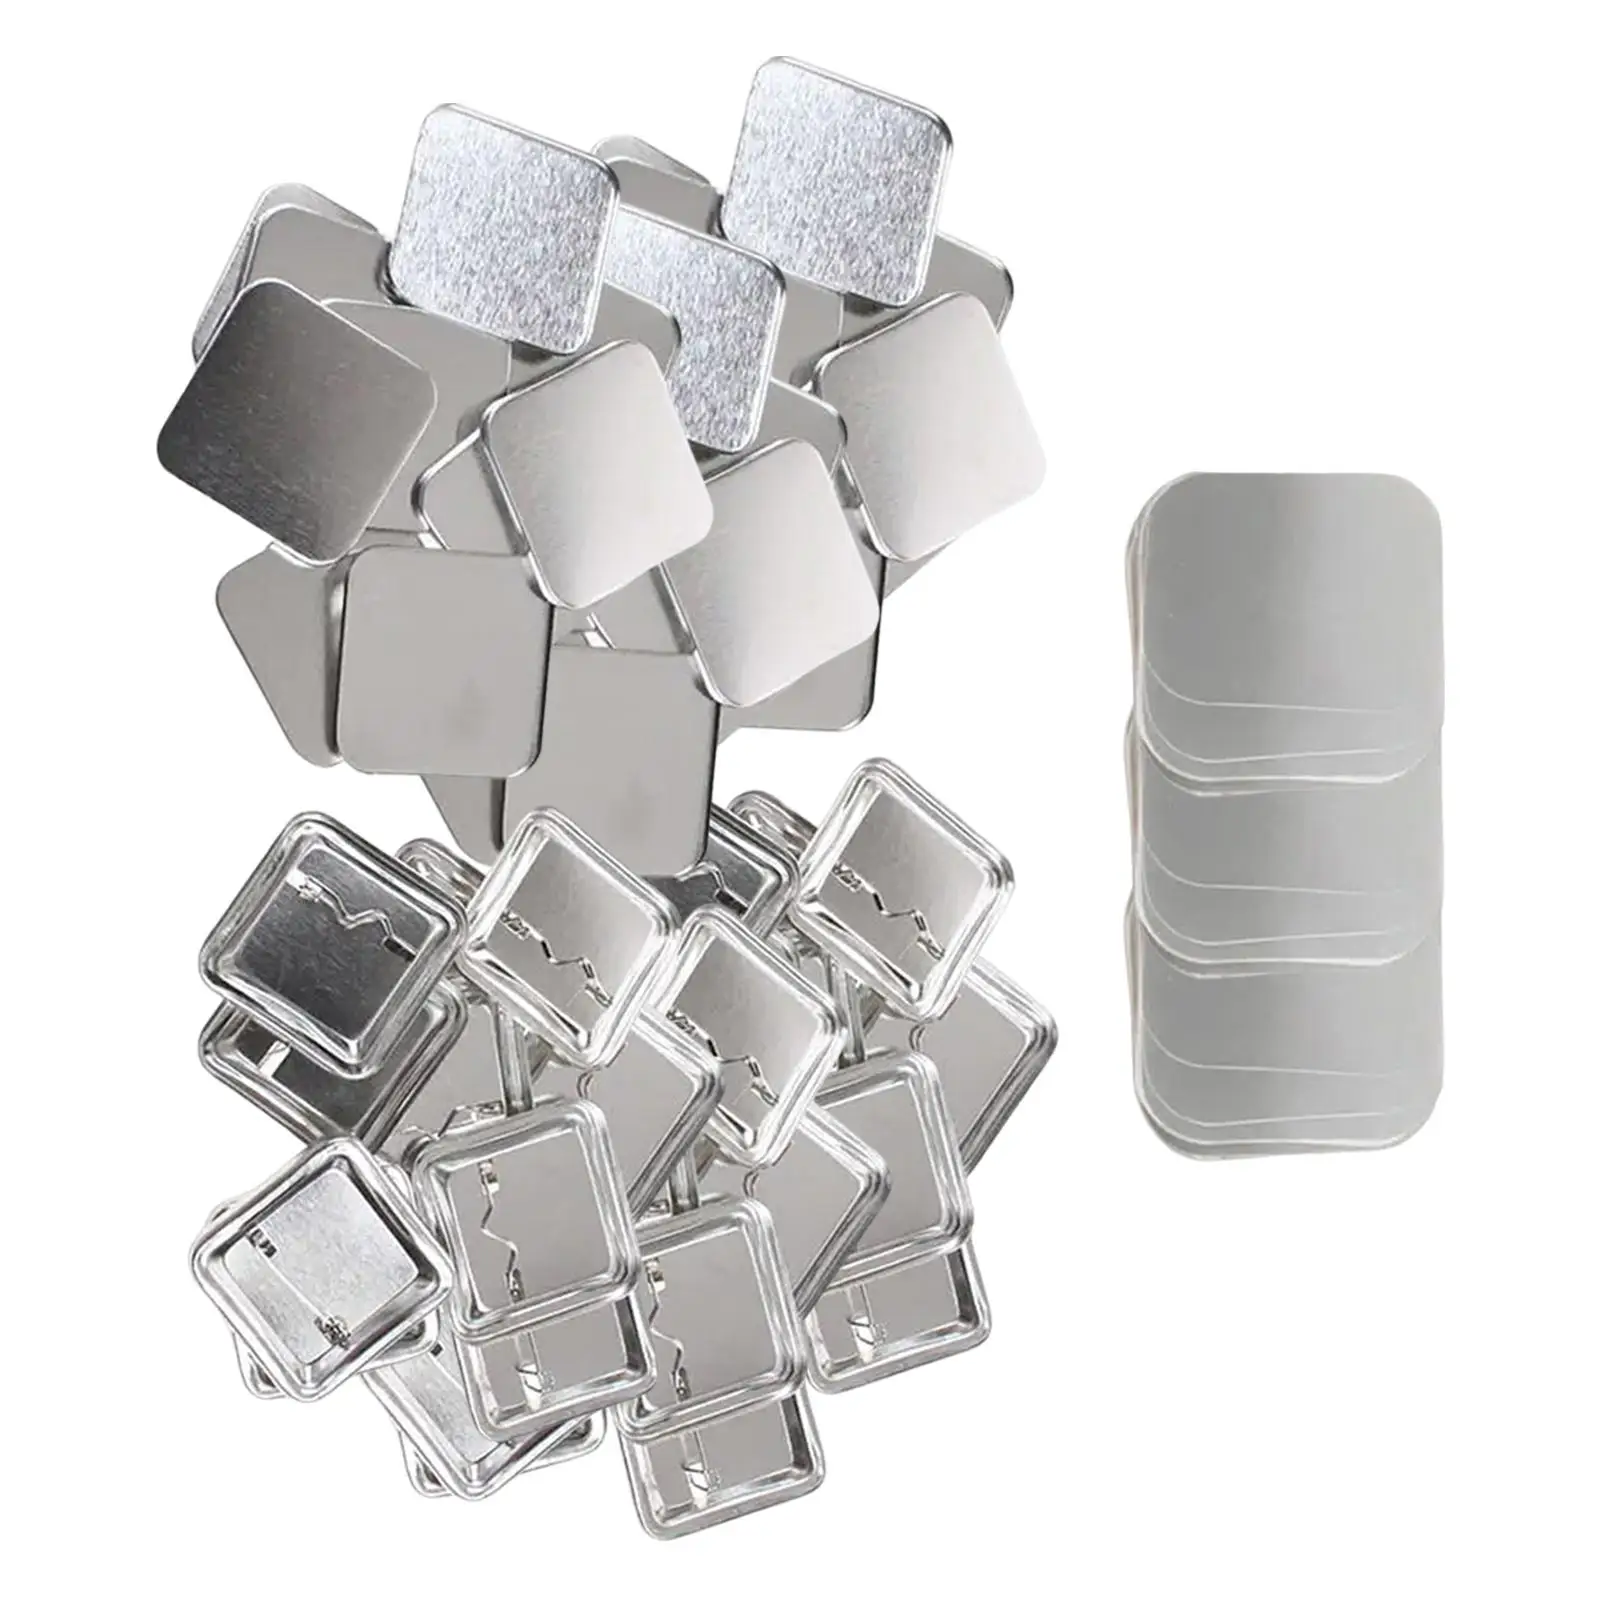 100Sets Blank Button Badge Supplies Metal Cover Clear Mylar Button Part for DIY Crafting Presents Souvenirs Jewelry Making